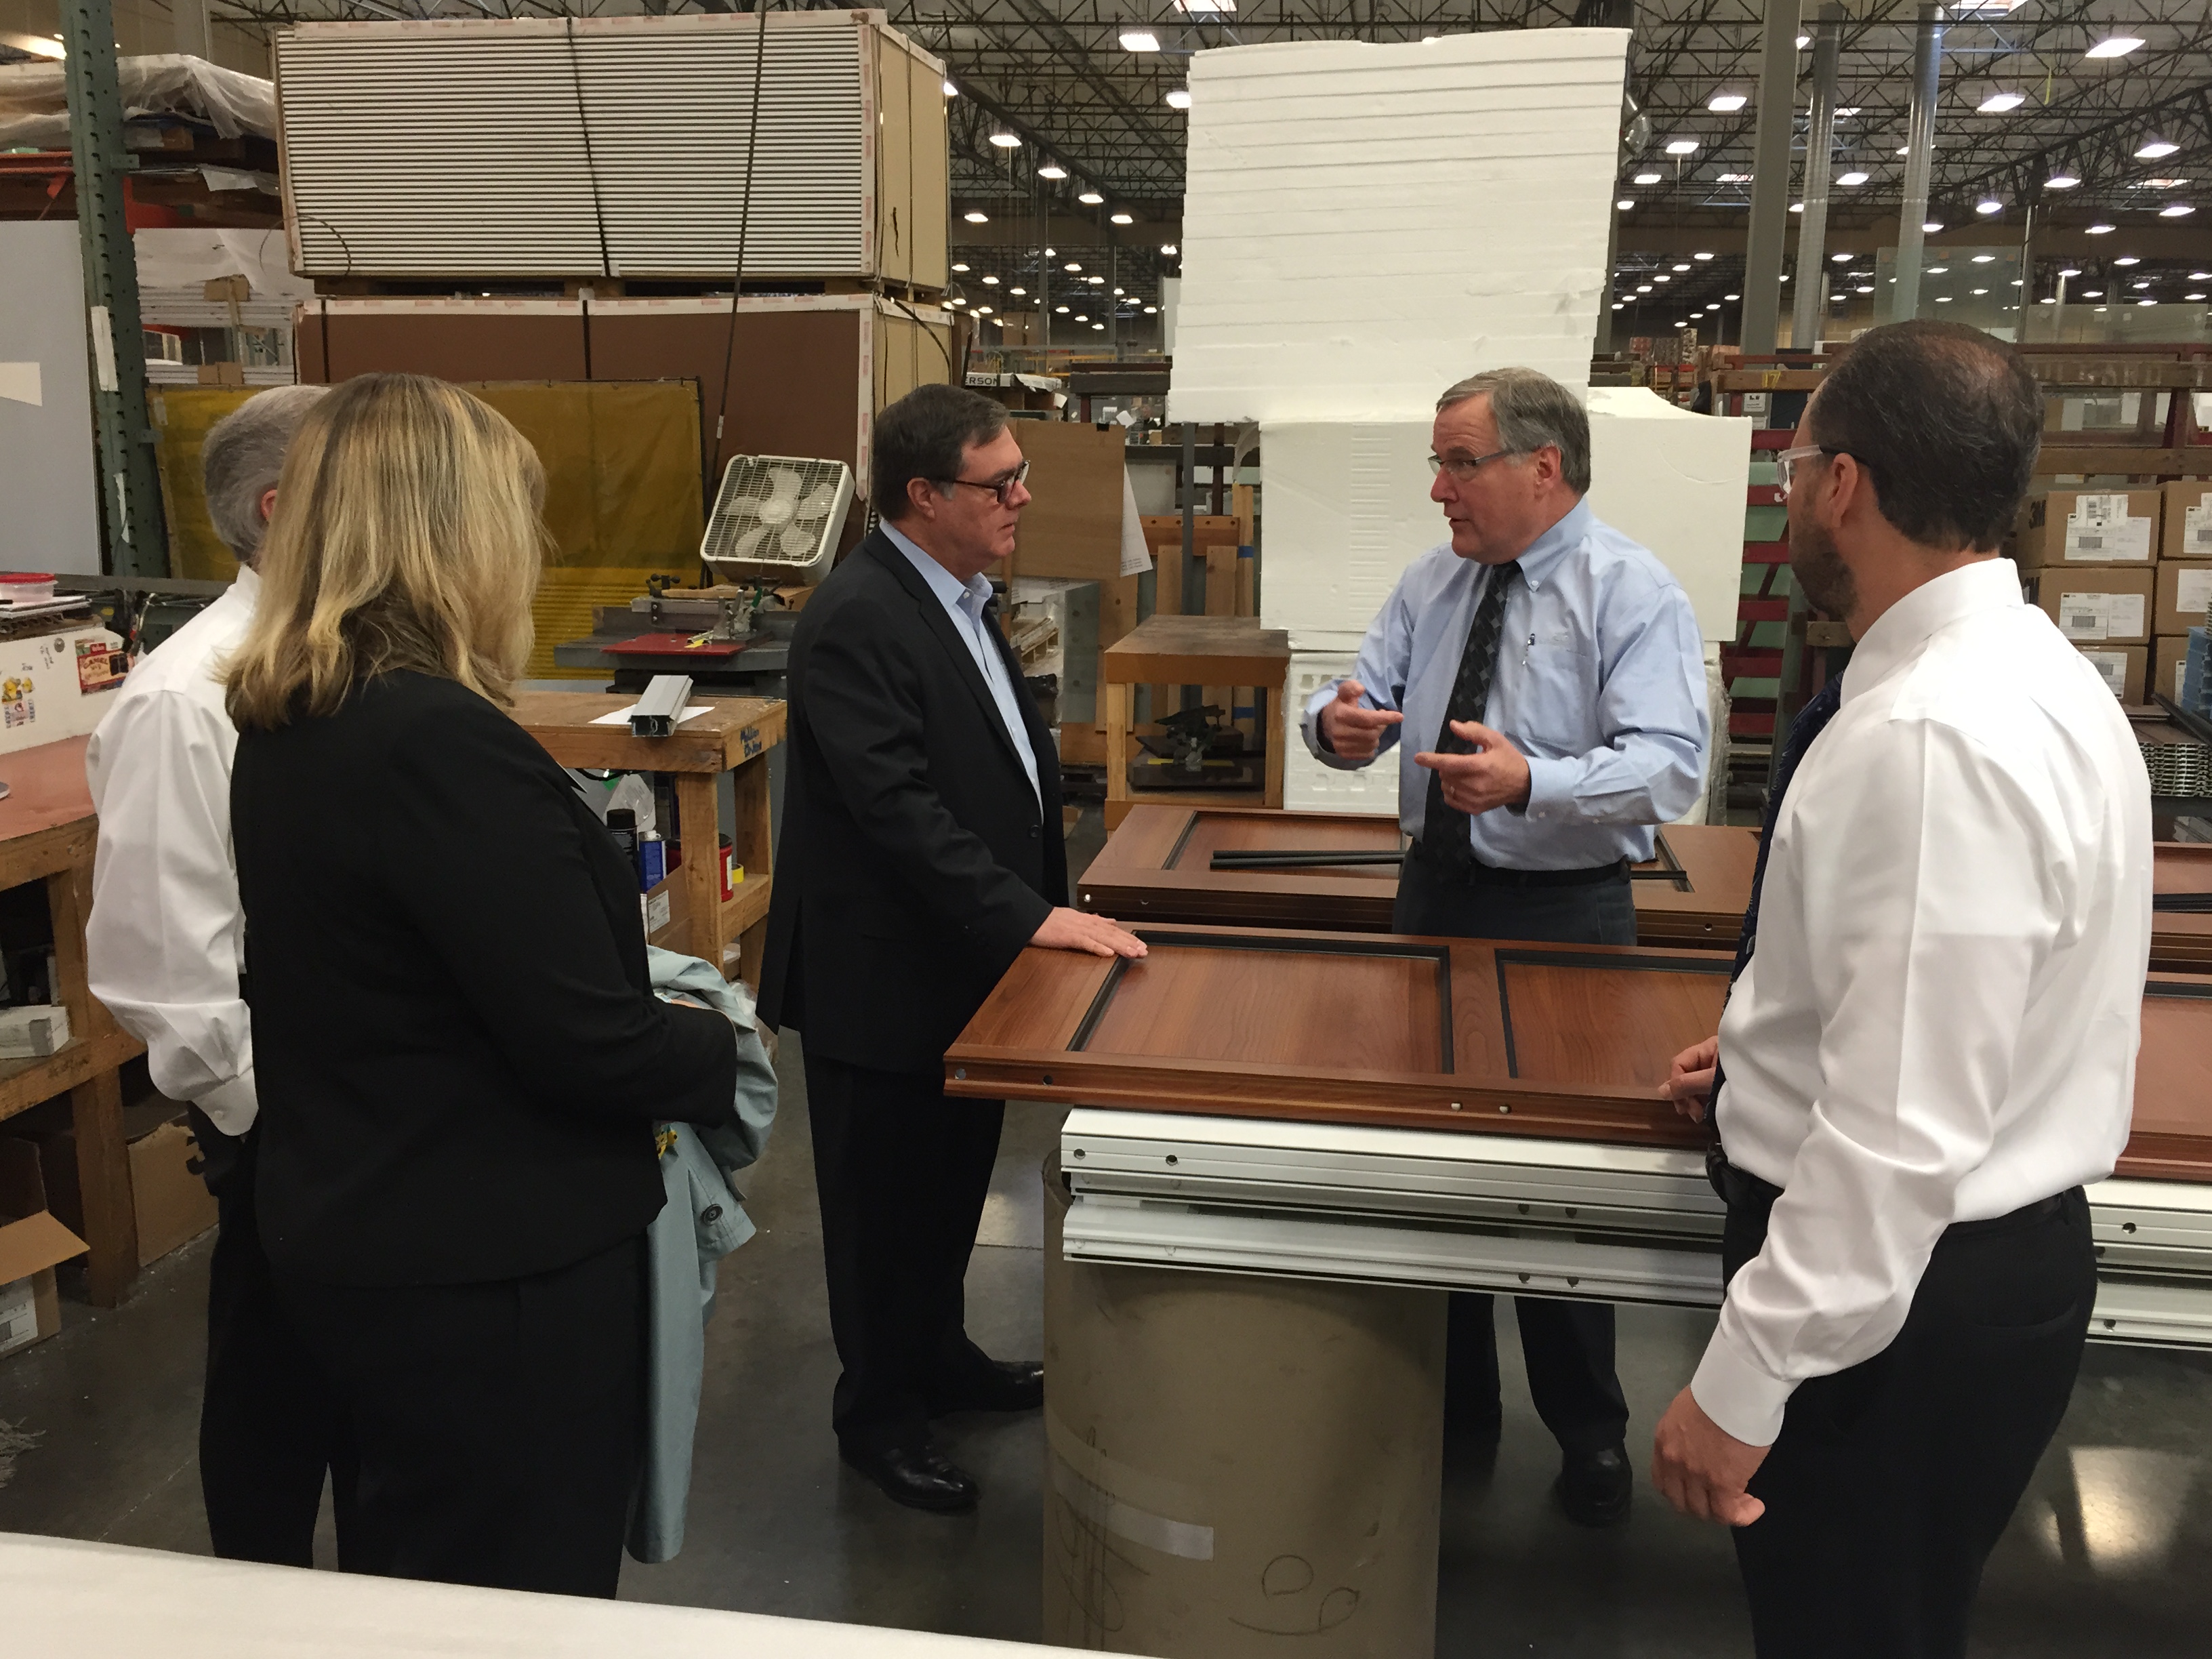 Rep. Heck visits a South Sound business